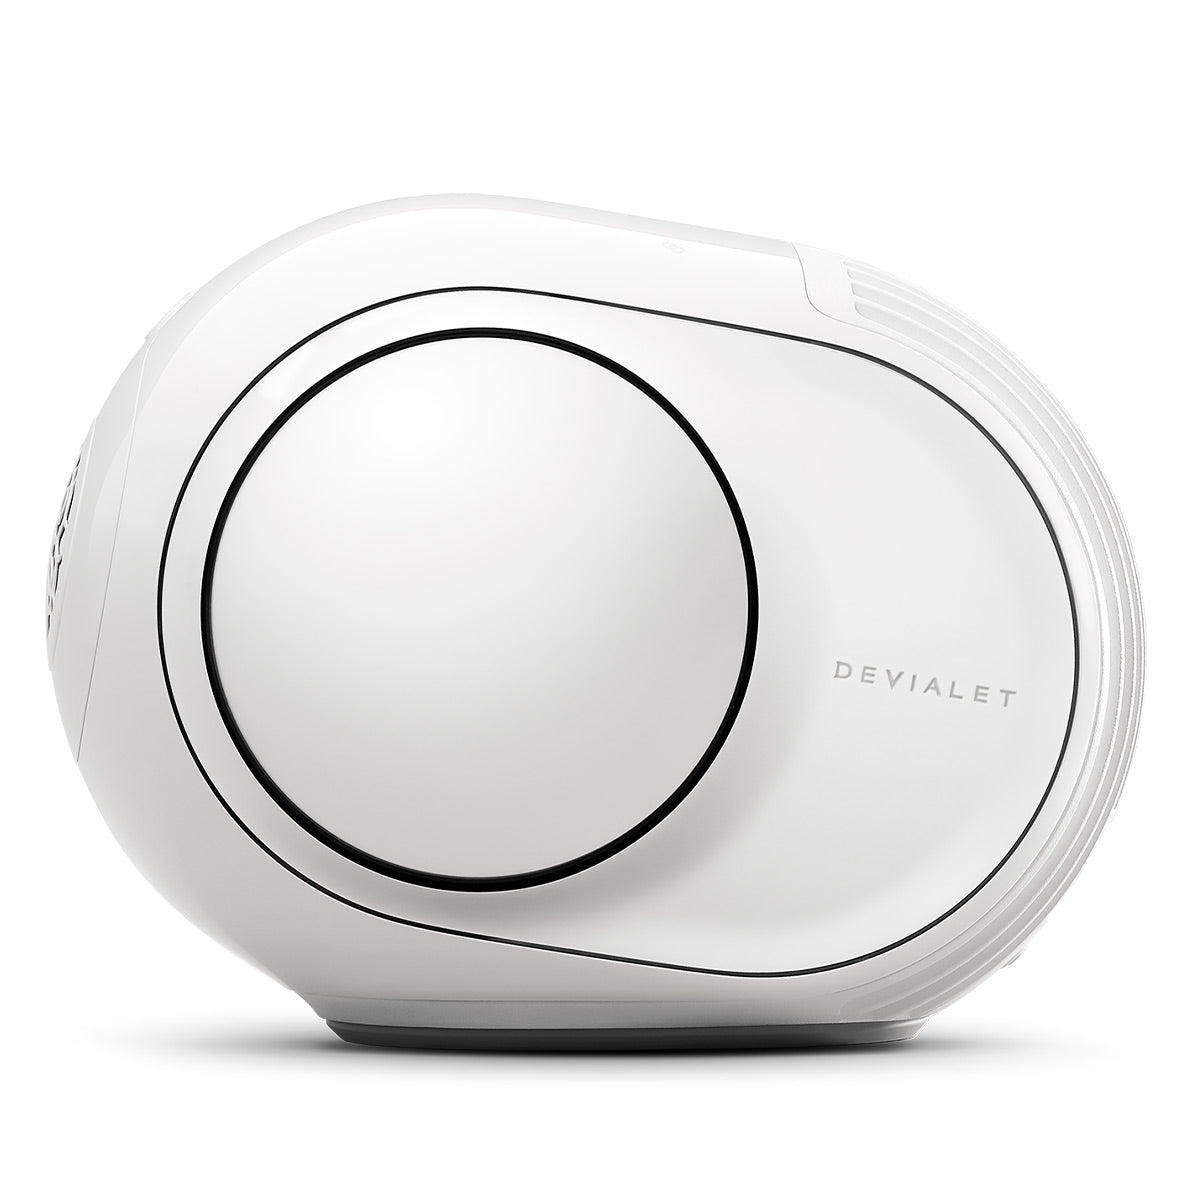 Devialet Phantom II 98db Wireless Compact Speaker (Iconic White) with Remote (Matte White)